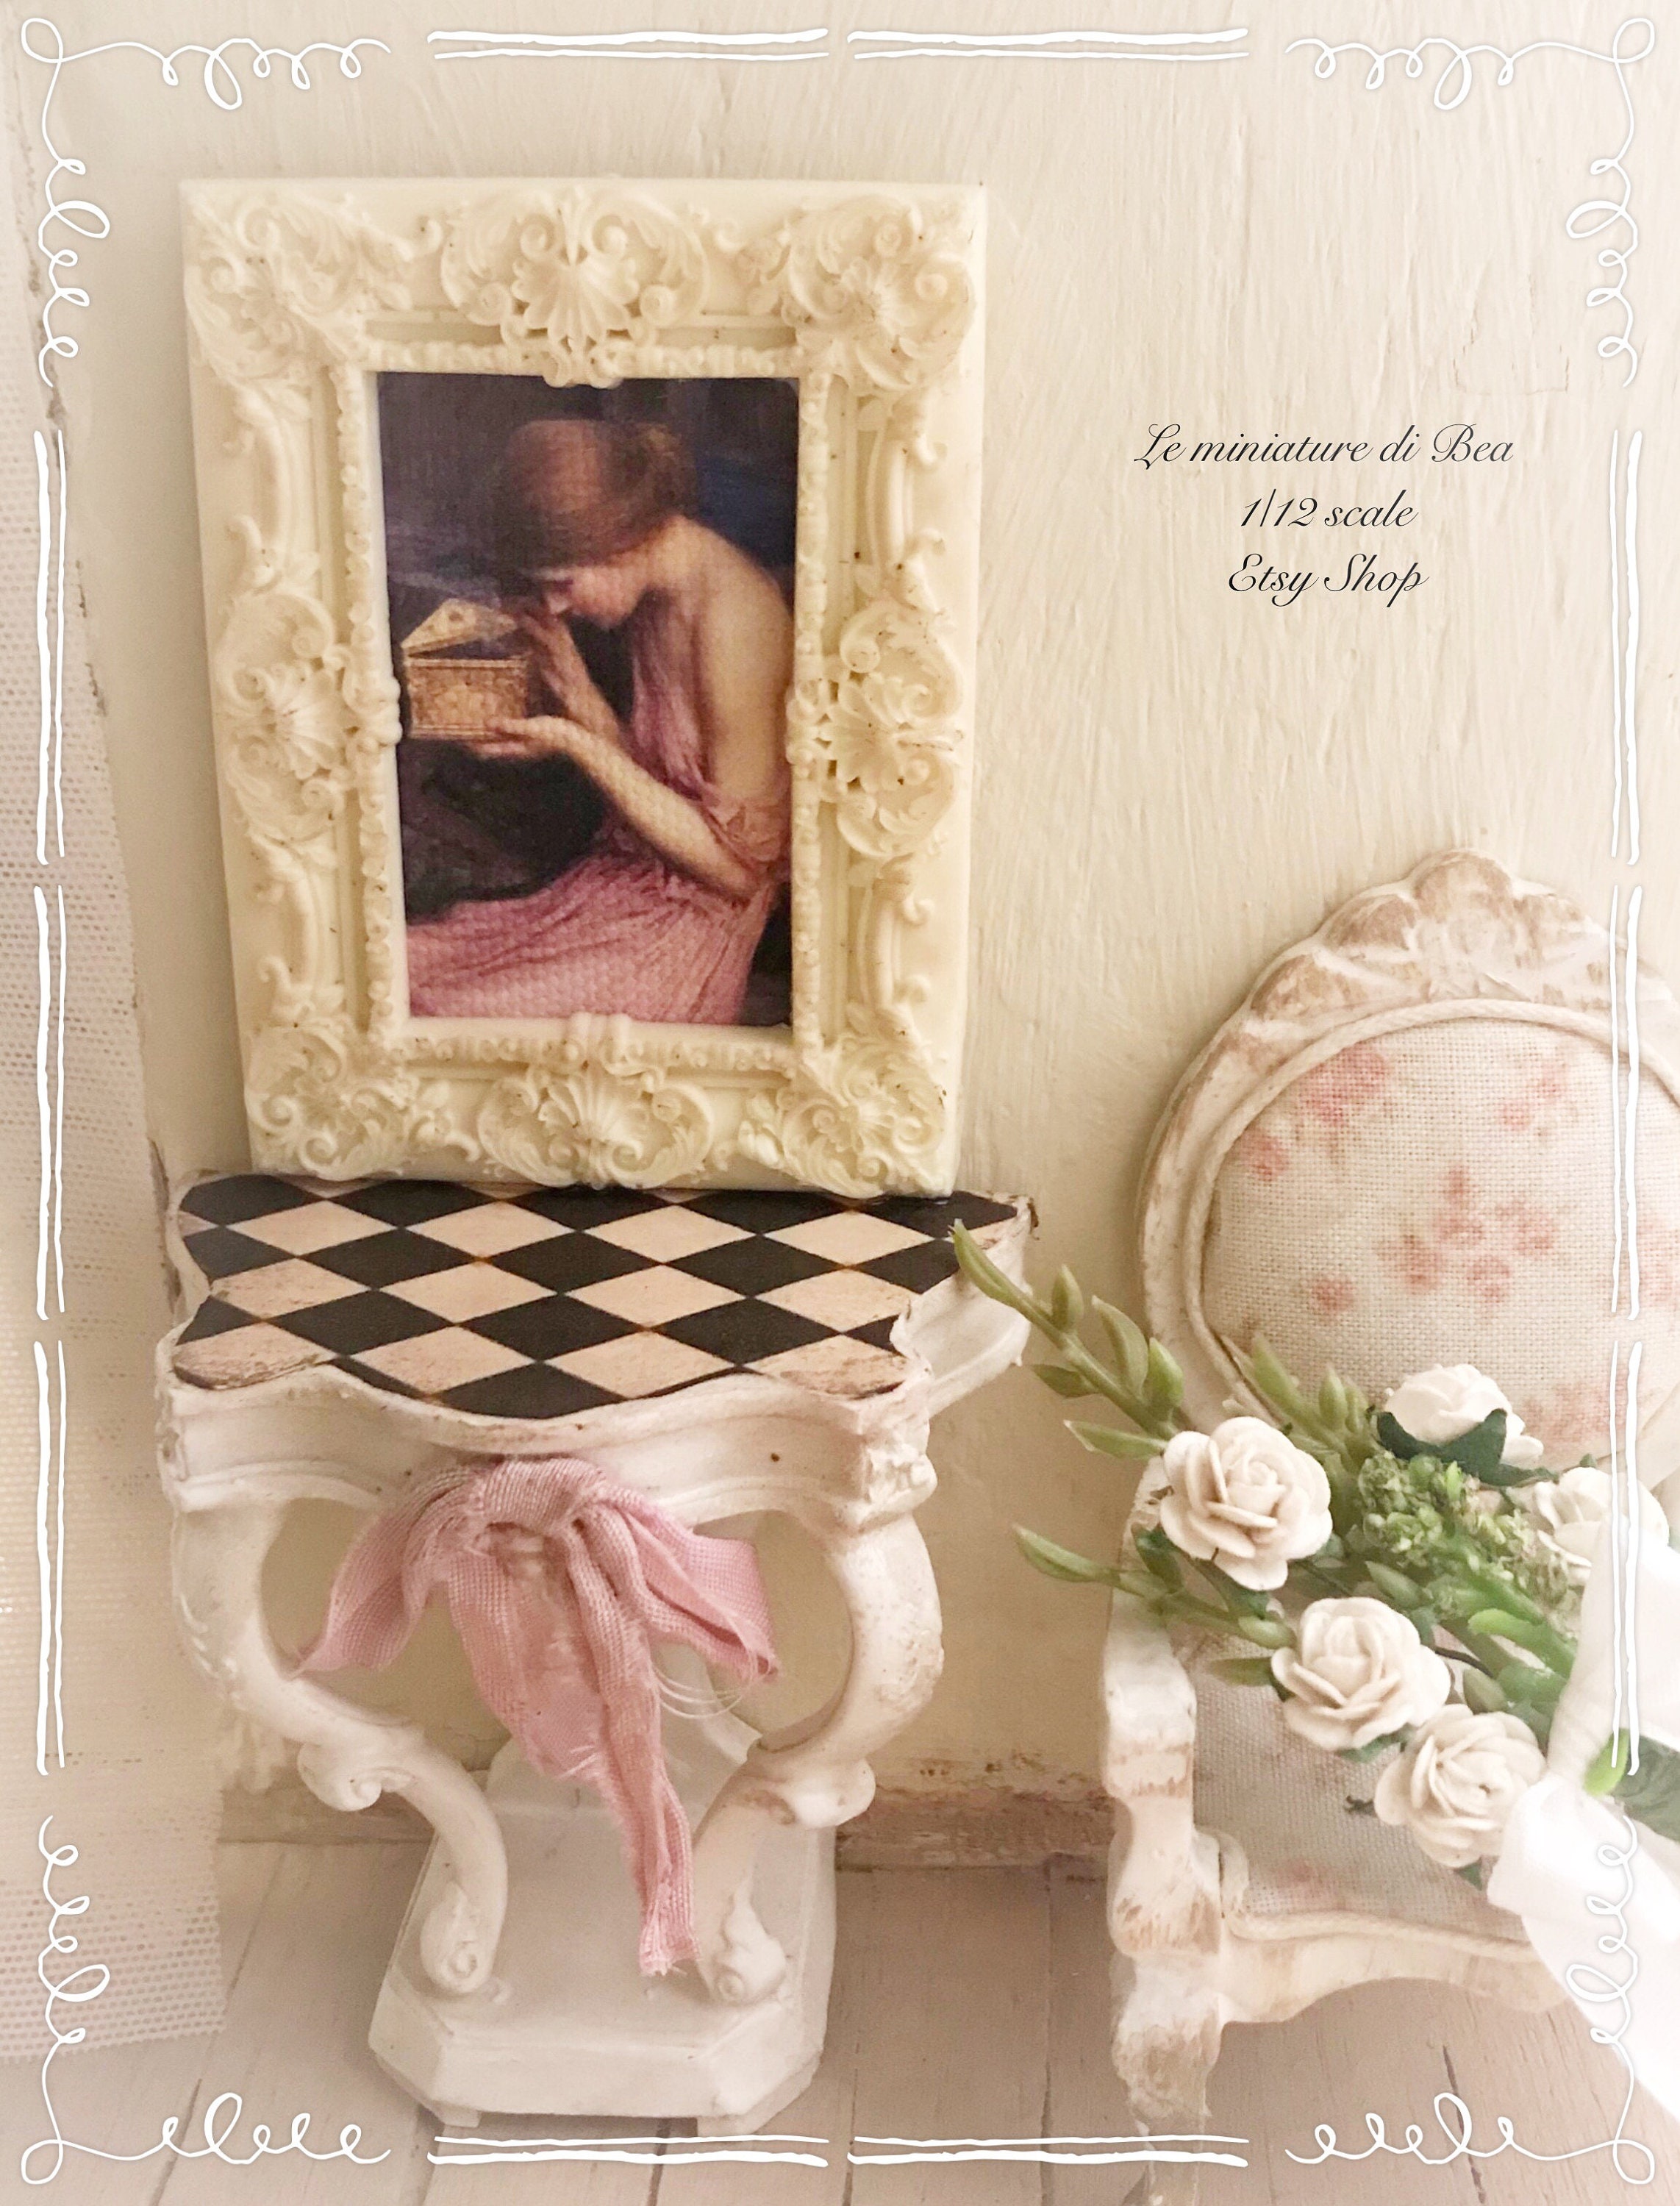 112 picture frame victorian photo dollshouse miniature hand made by Bea antiche style 4,5 x 4,5 cm